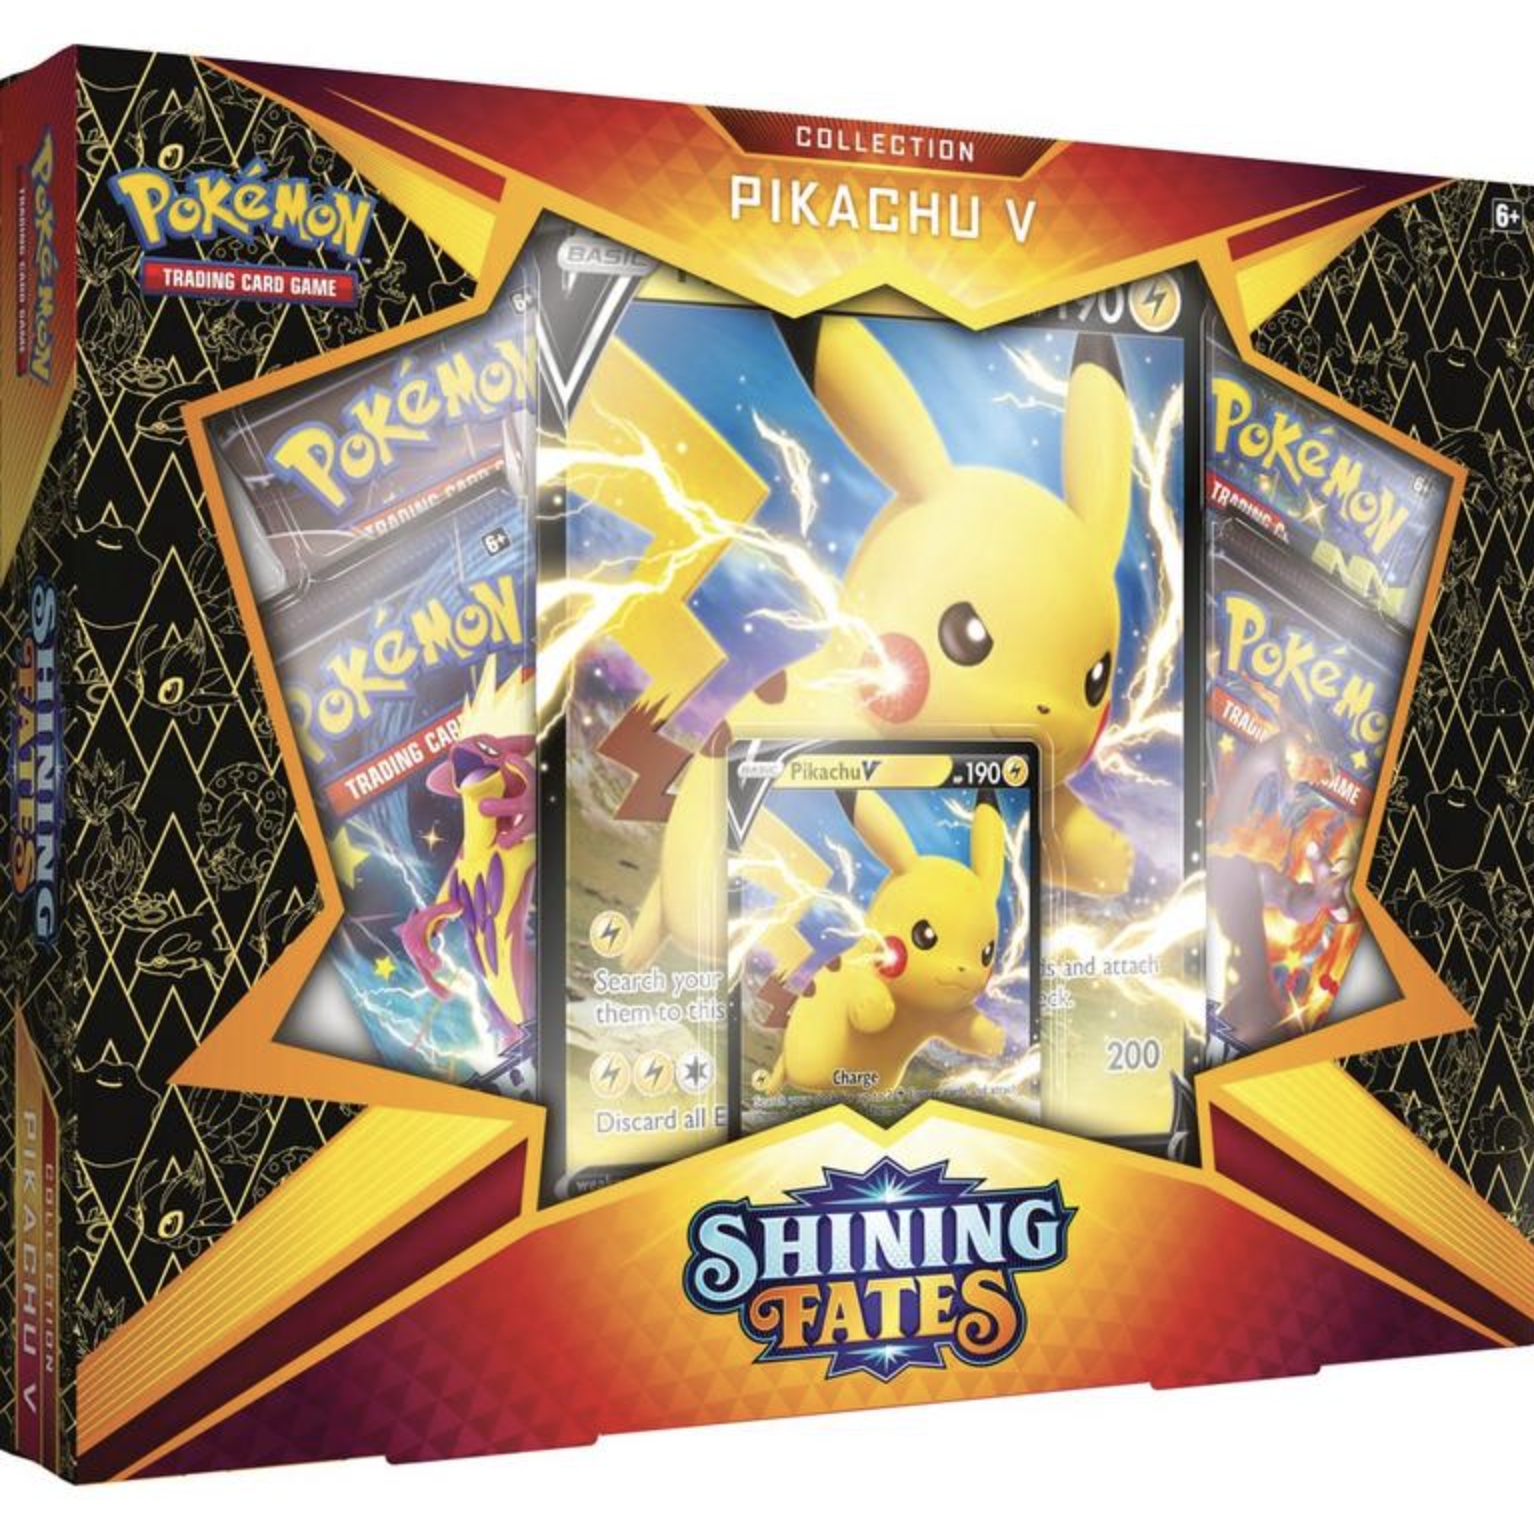 Pokemon TCG Shining Fates Pikachu V Box Collection Factory Sealed 4 Booster Pack 